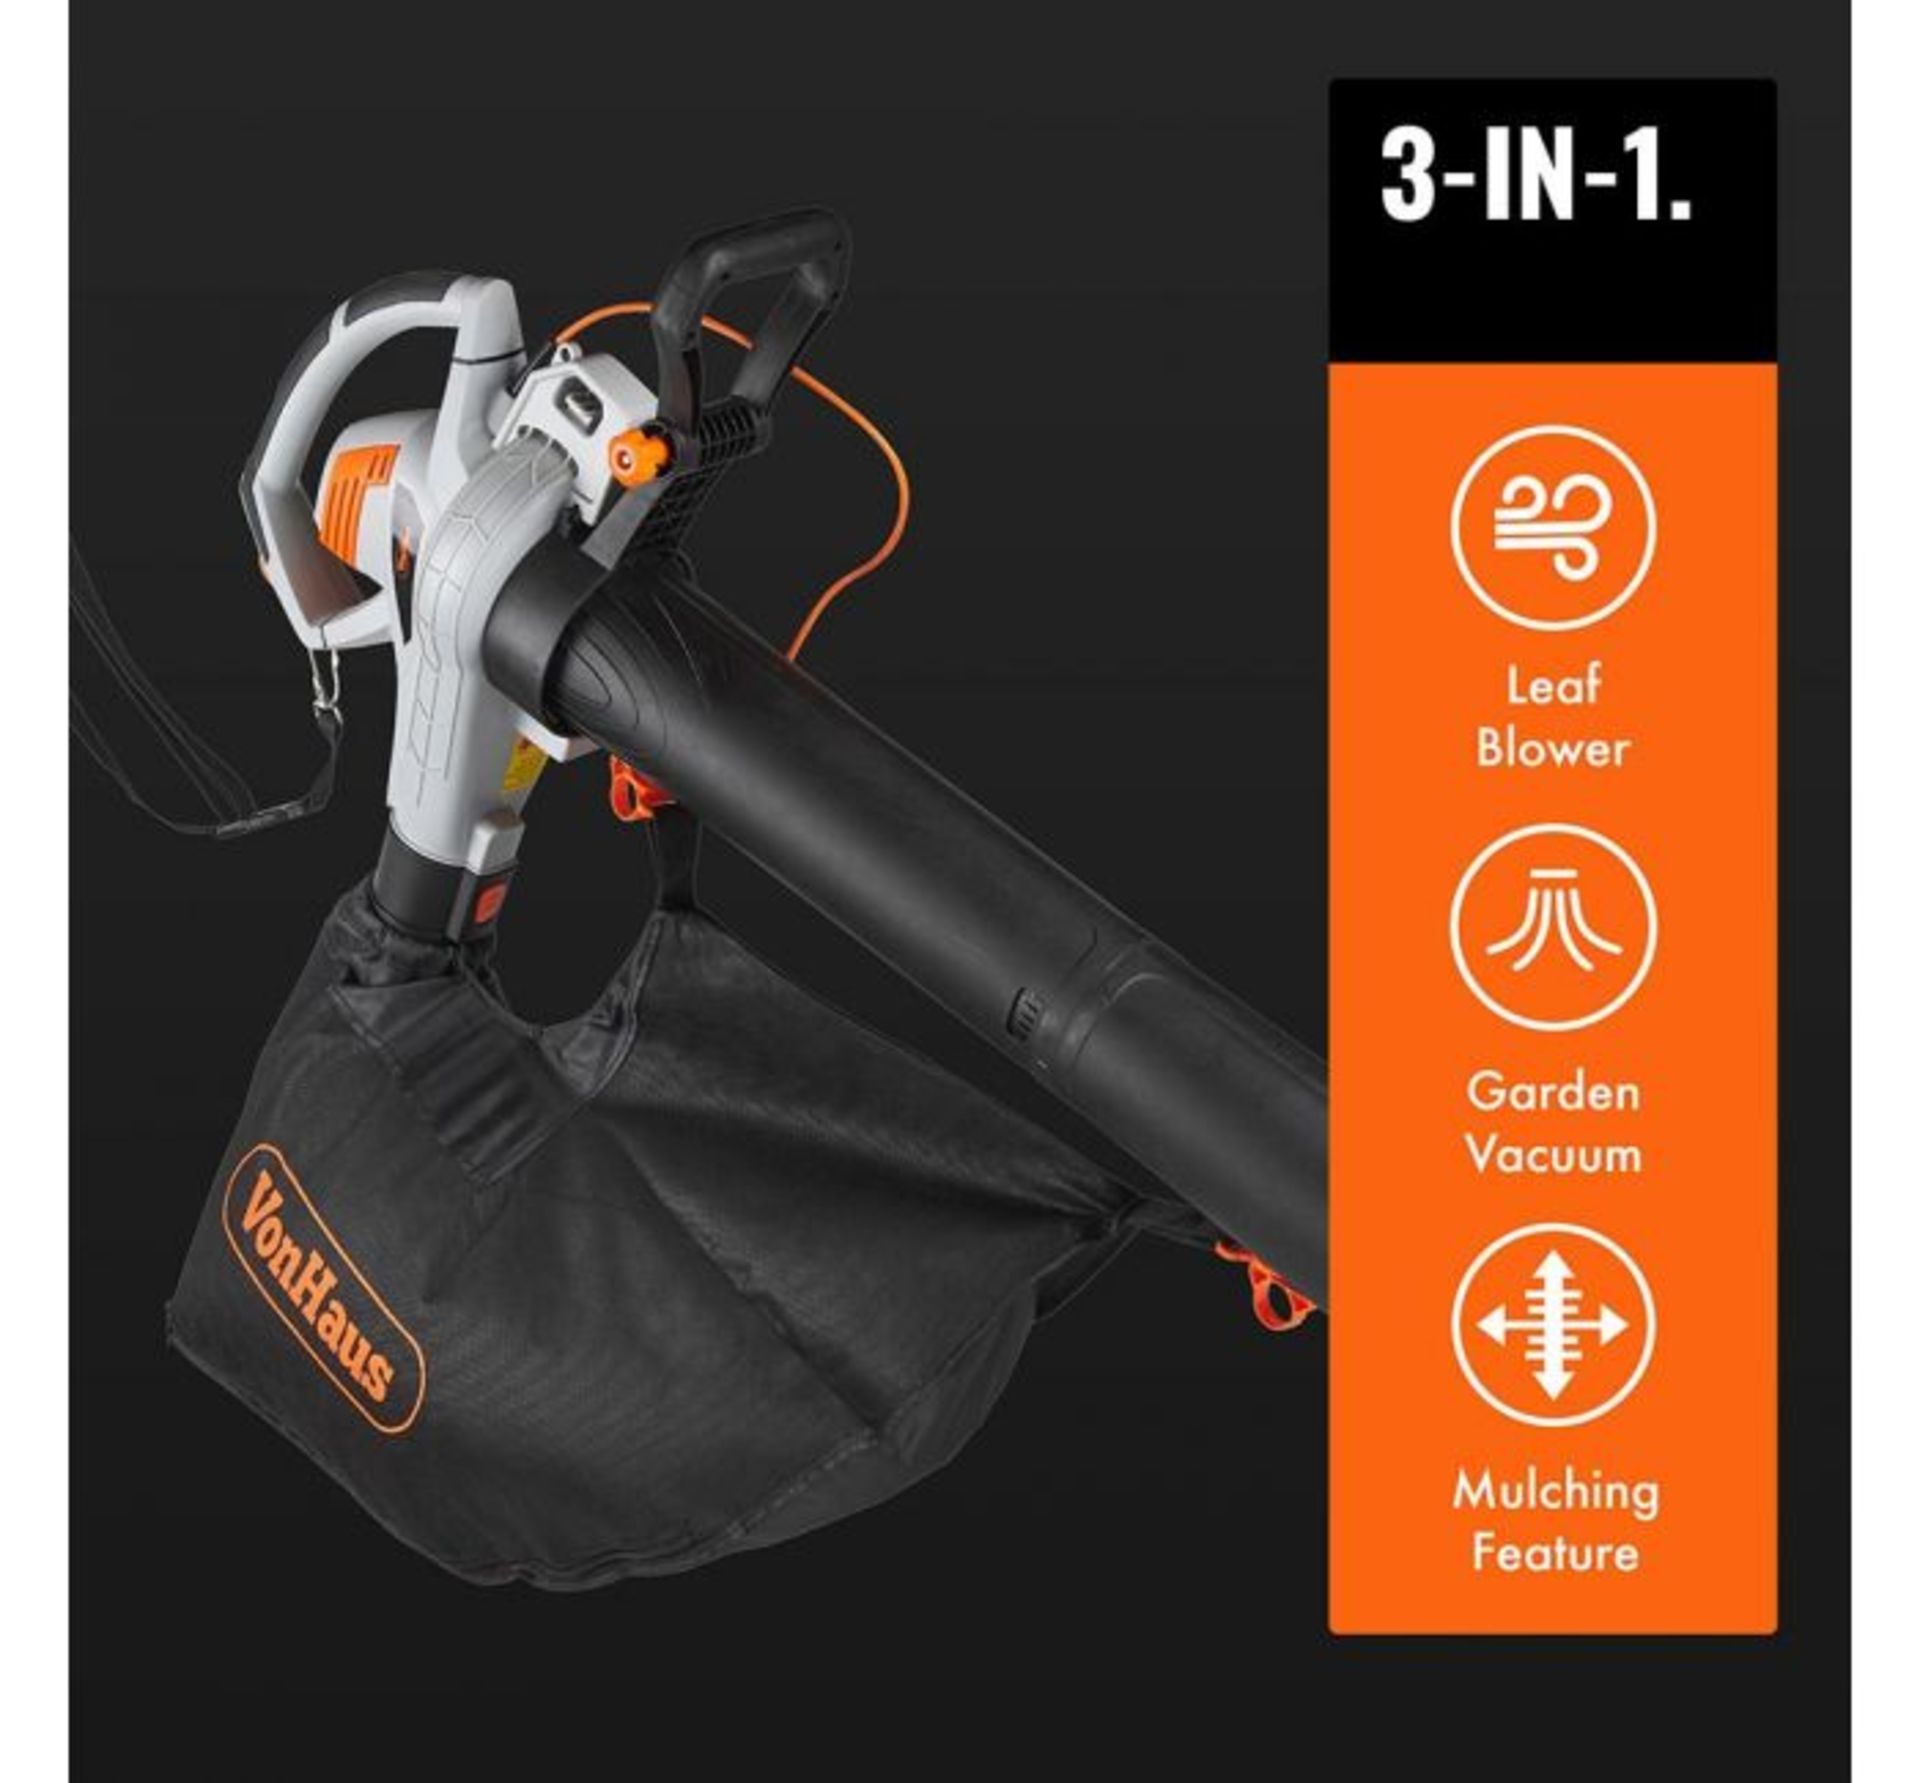 (DD25) 3000W 3-in-1 Leaf Blower Powerful 3000W motor blows, vacuums and mulches leaves into ma... - Image 2 of 4